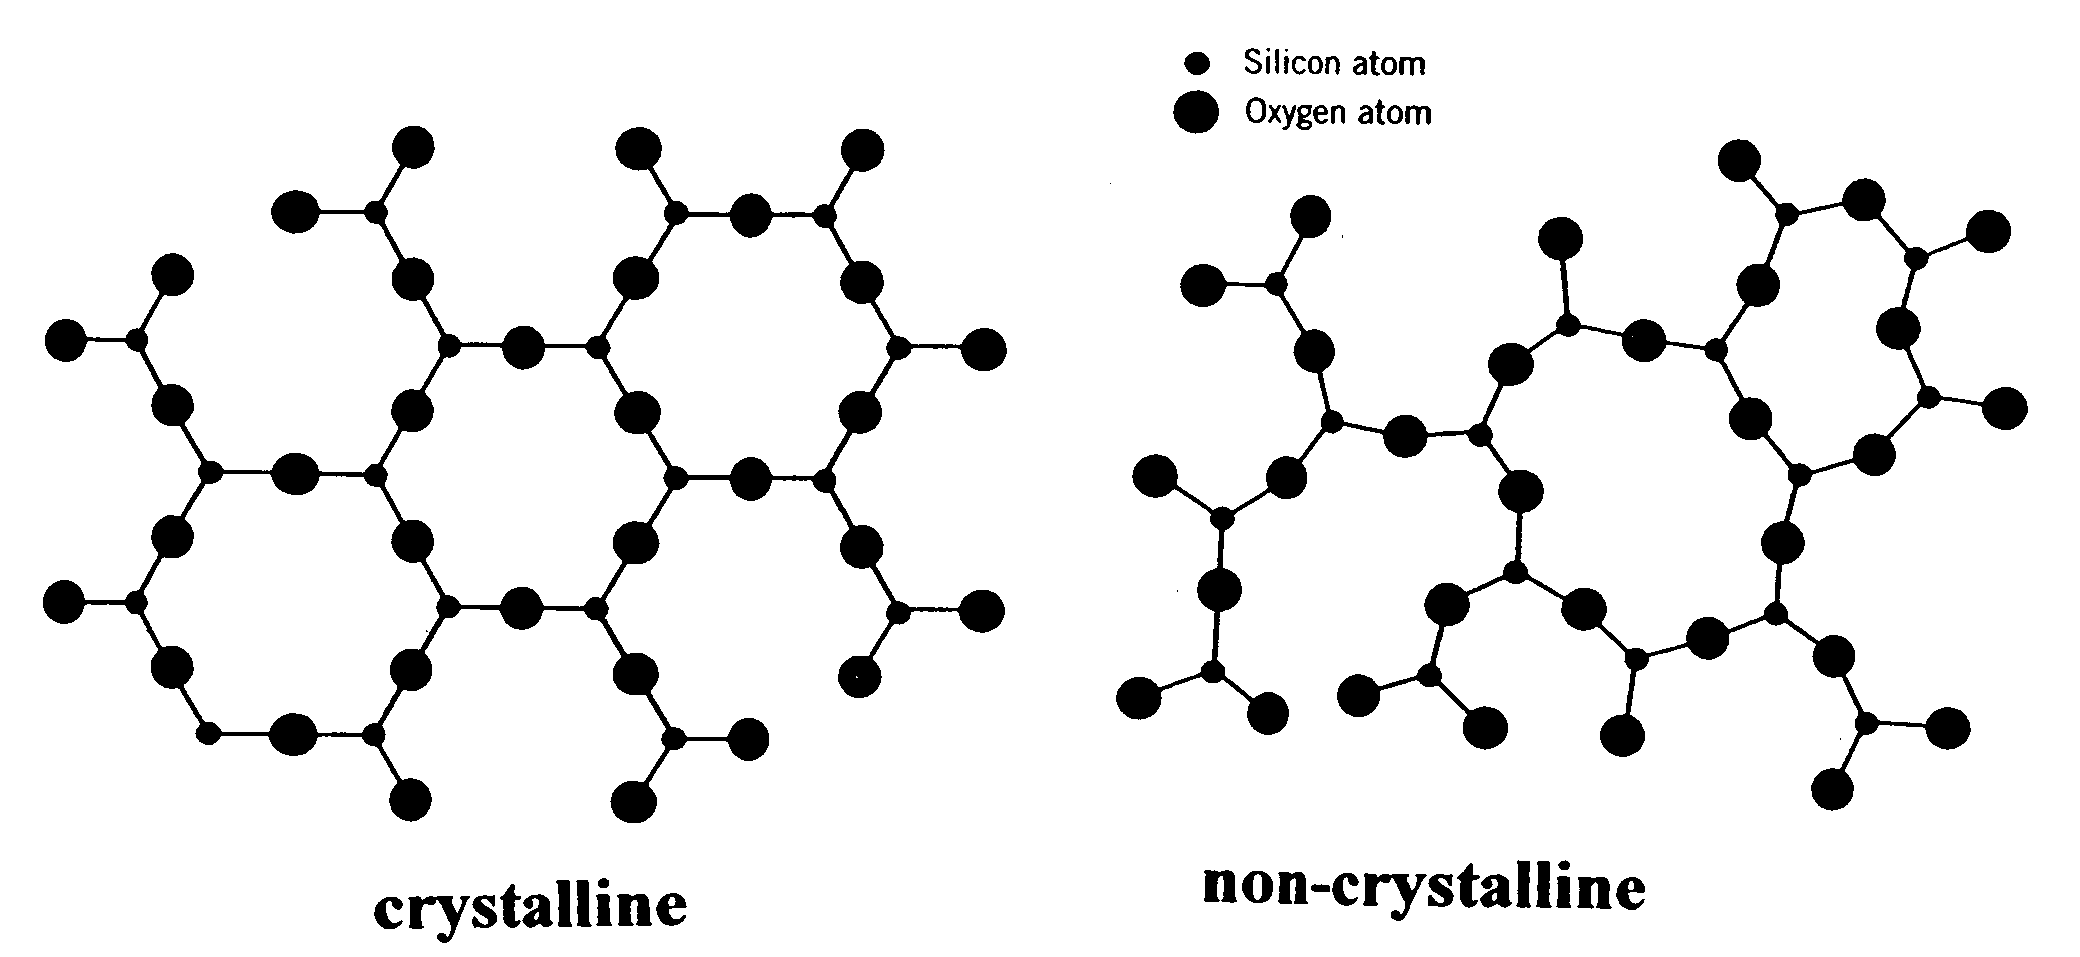 [Crystalline and Glassy Silica]